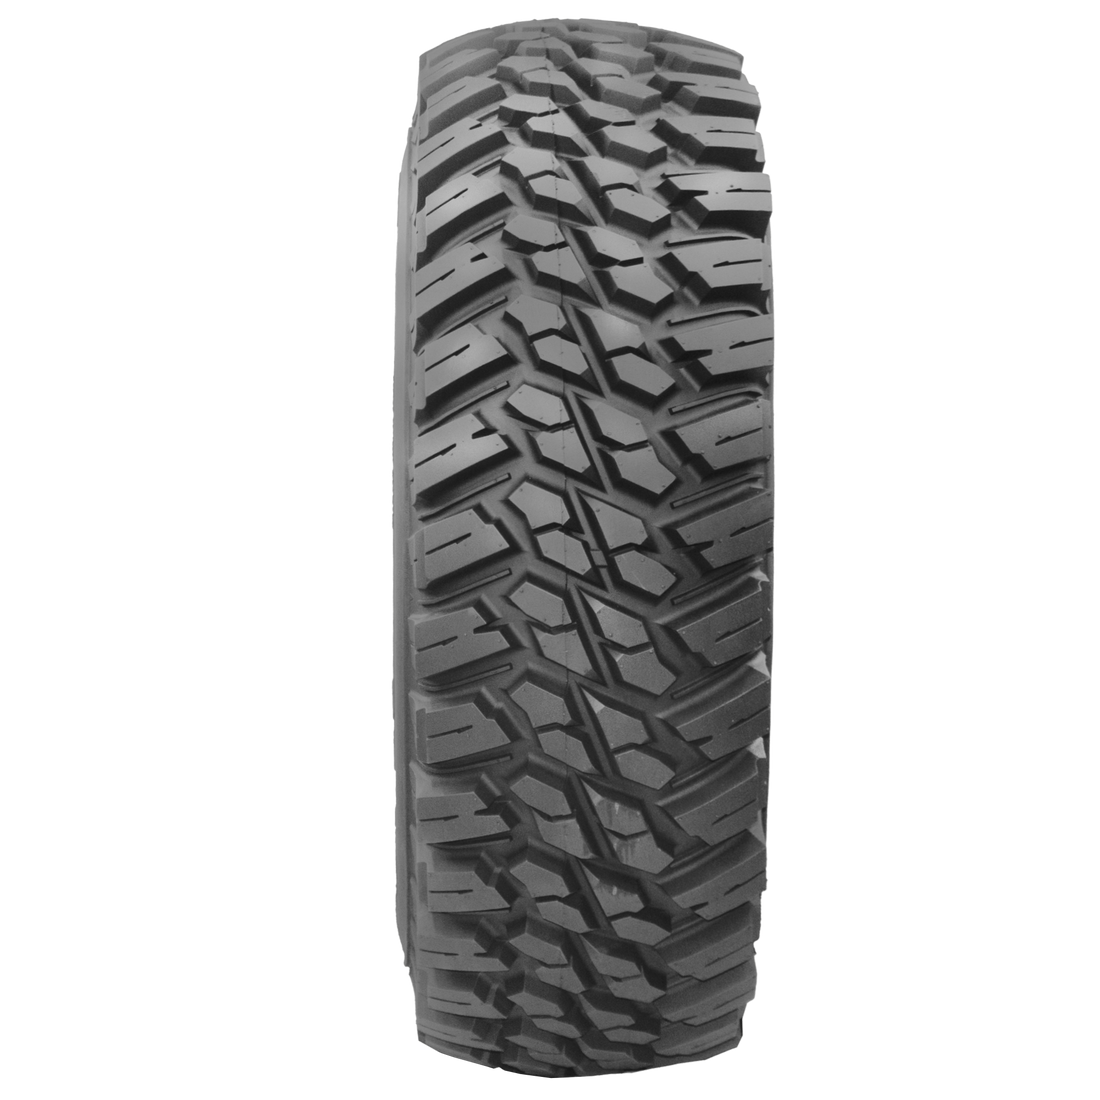 Full frontal view of Mongrel SQ ATV/UTV tire, showcasing its comprehensive tread pattern, designed for superior traction across varied landscapes, promising a safe and reliable off-road experience.